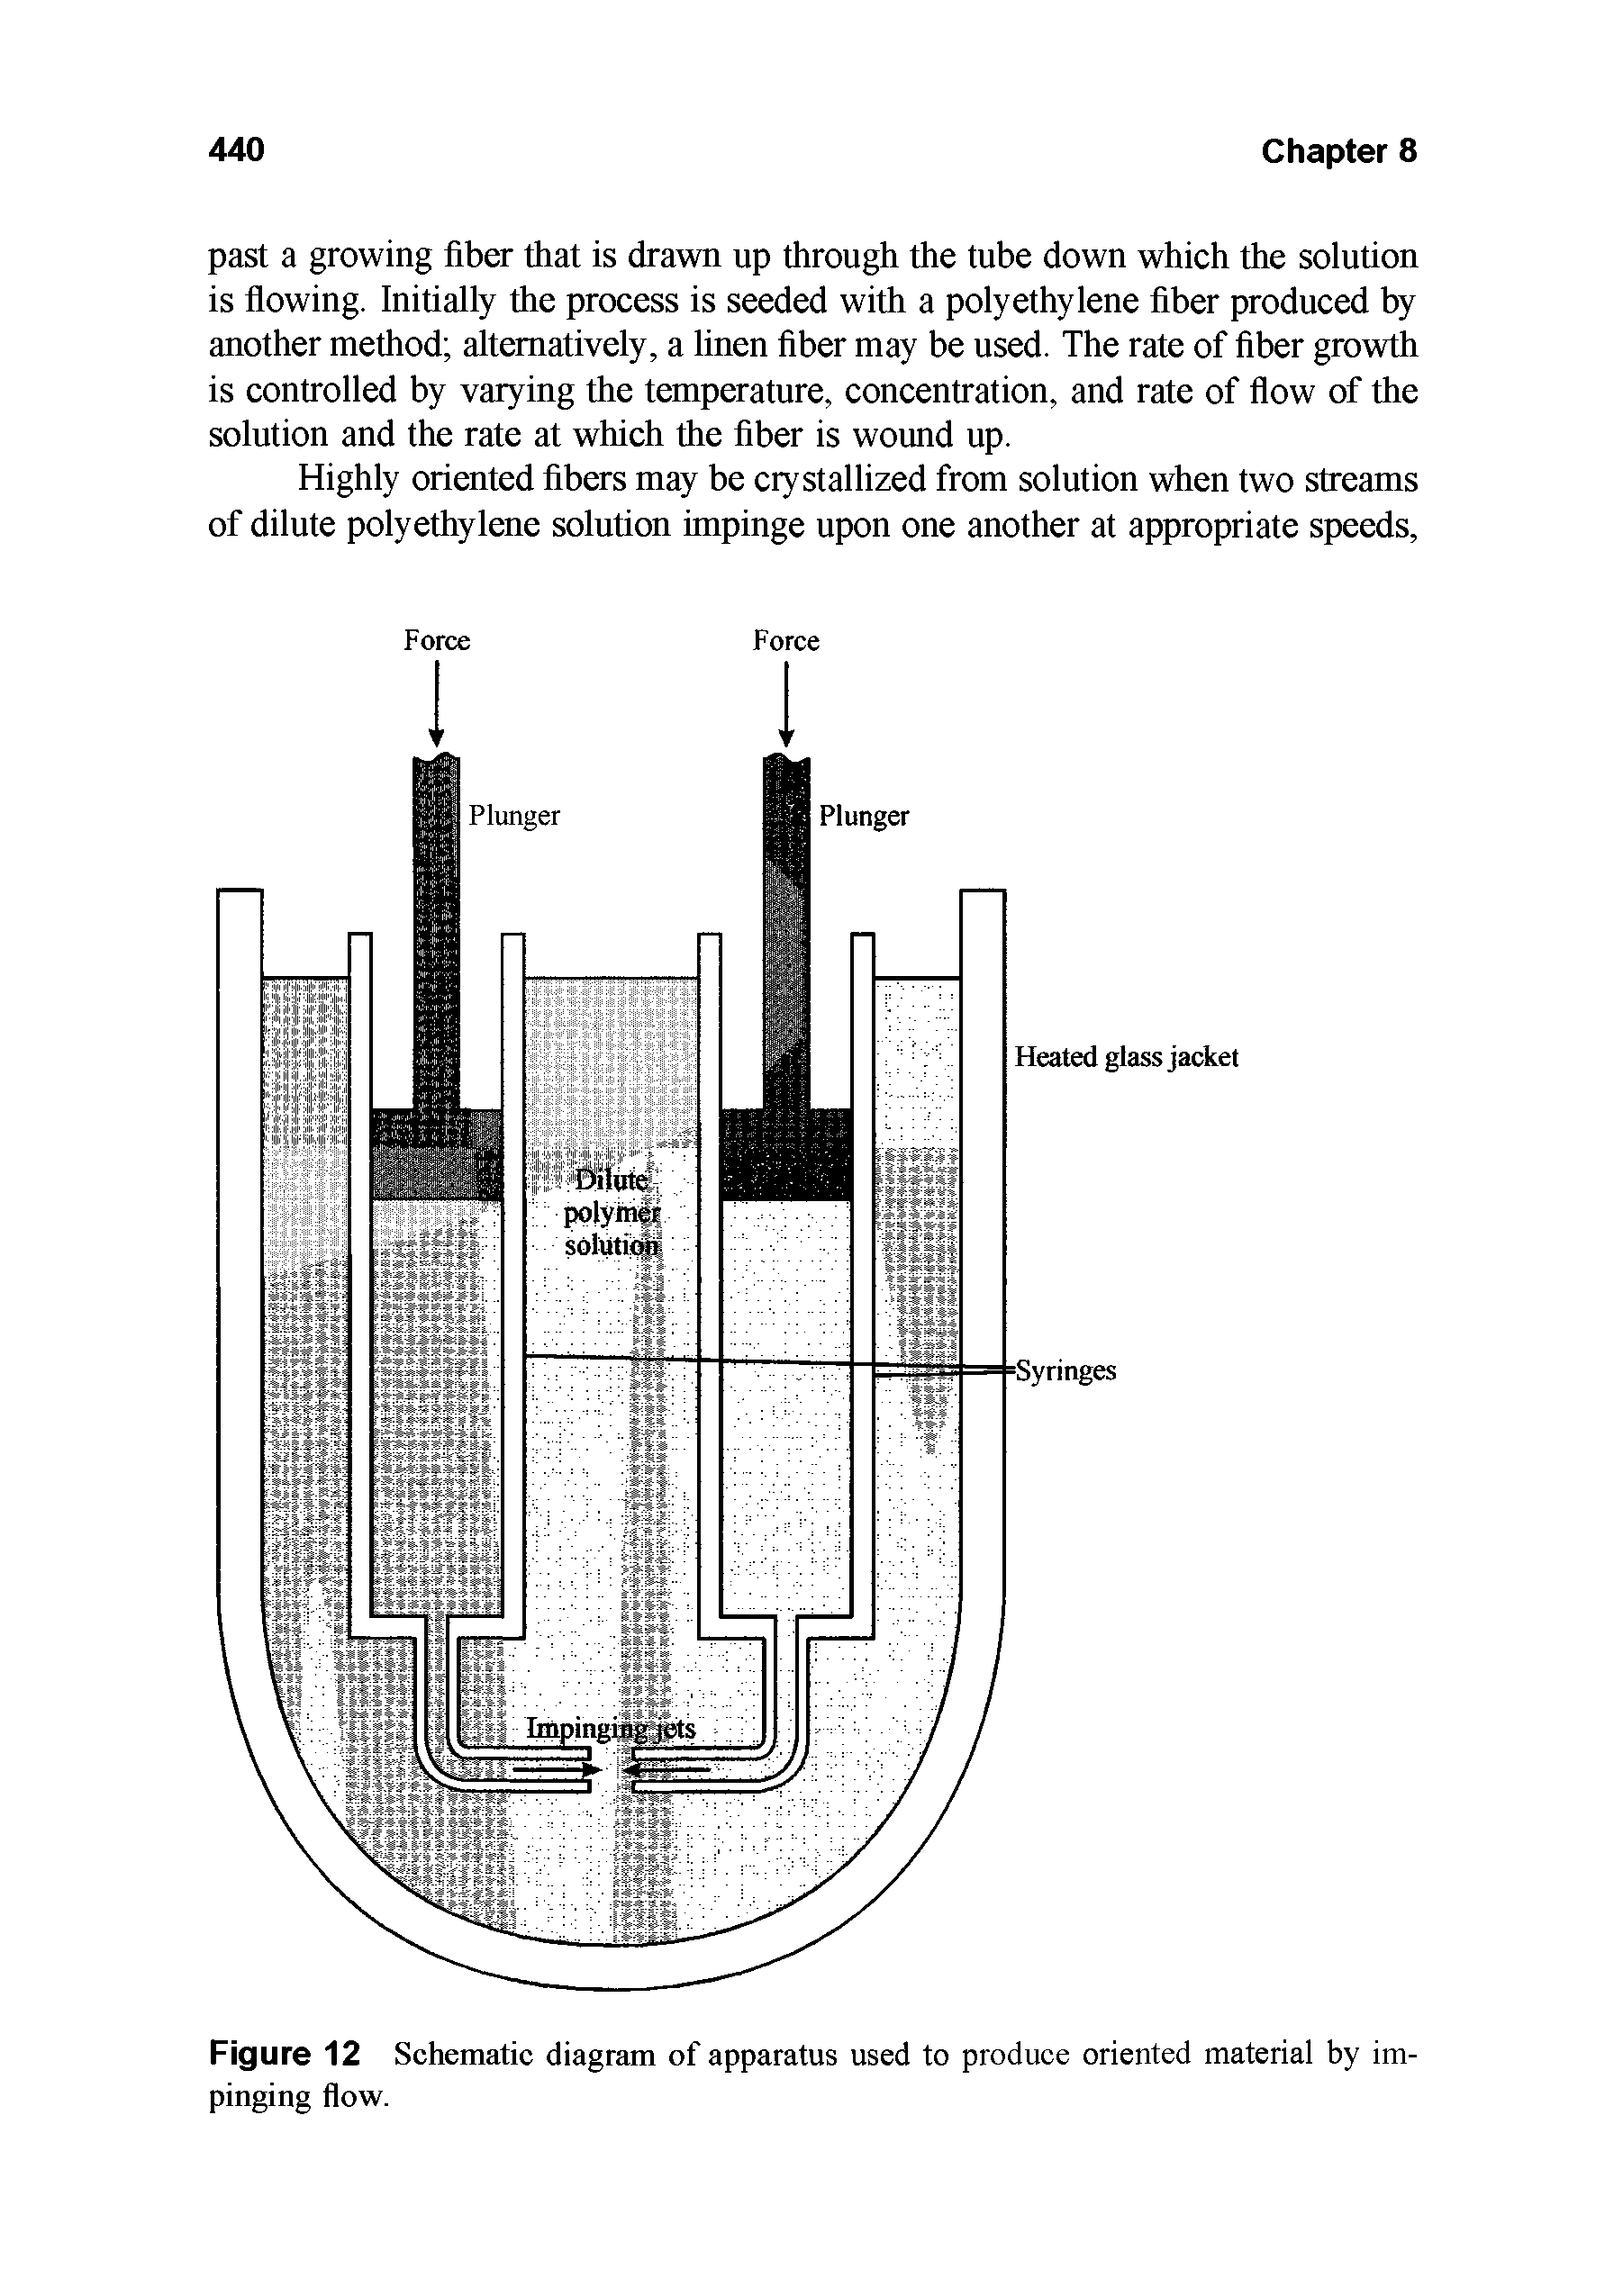 Figure 12 Schematic diagram of apparatus used to produce oriented material by impinging flow.